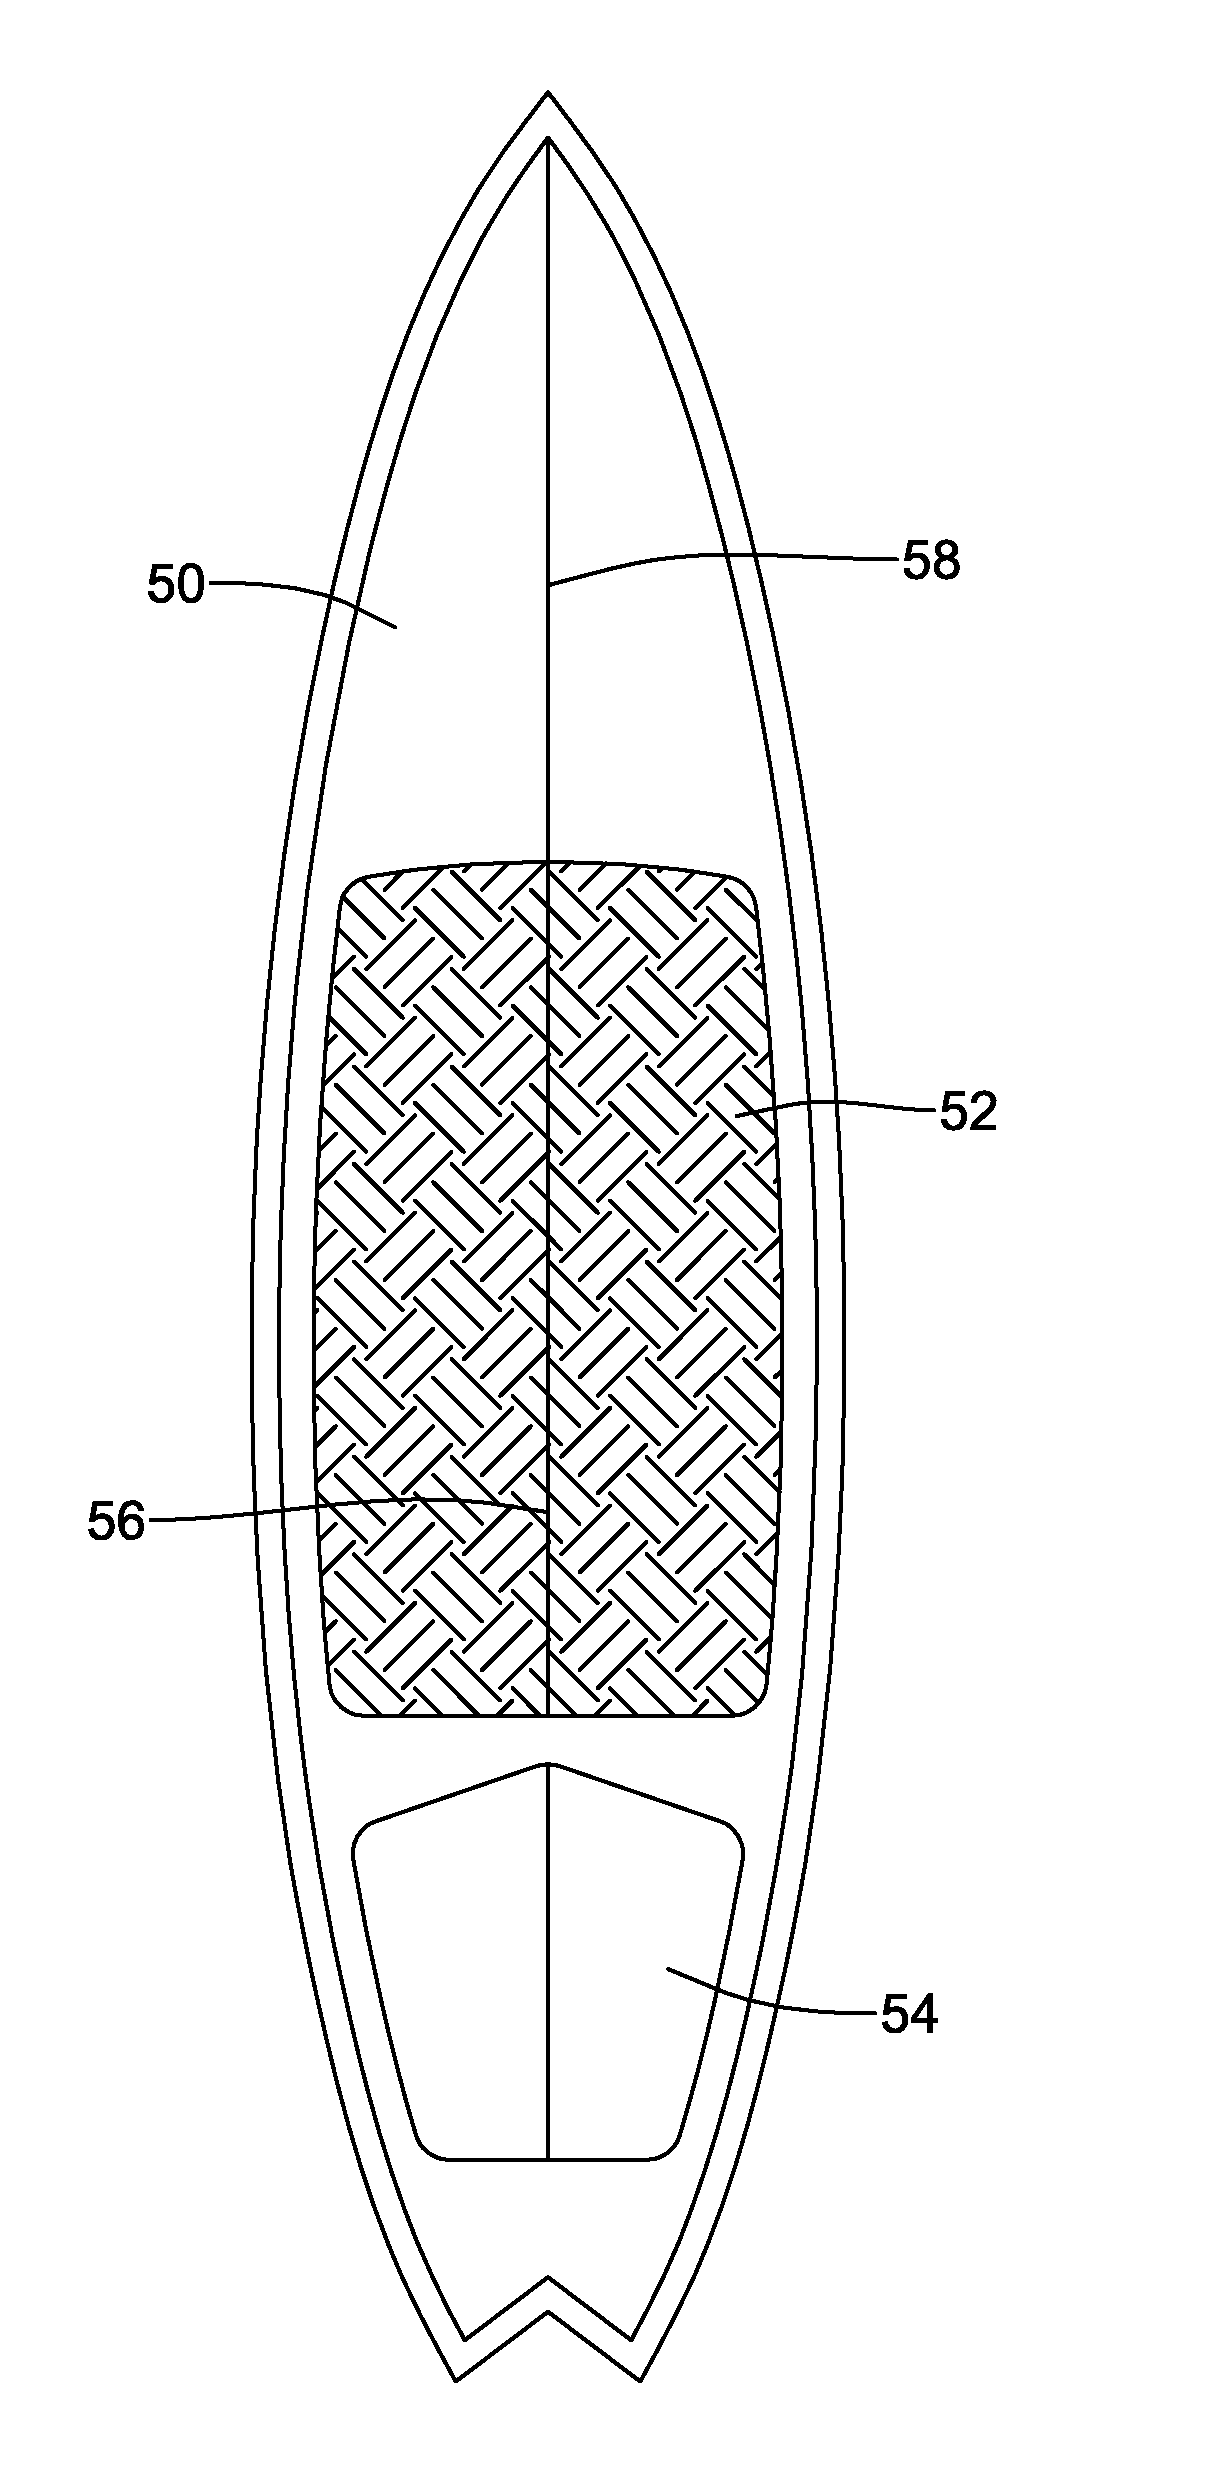 Methods and systems for selective wax application on a sports implement